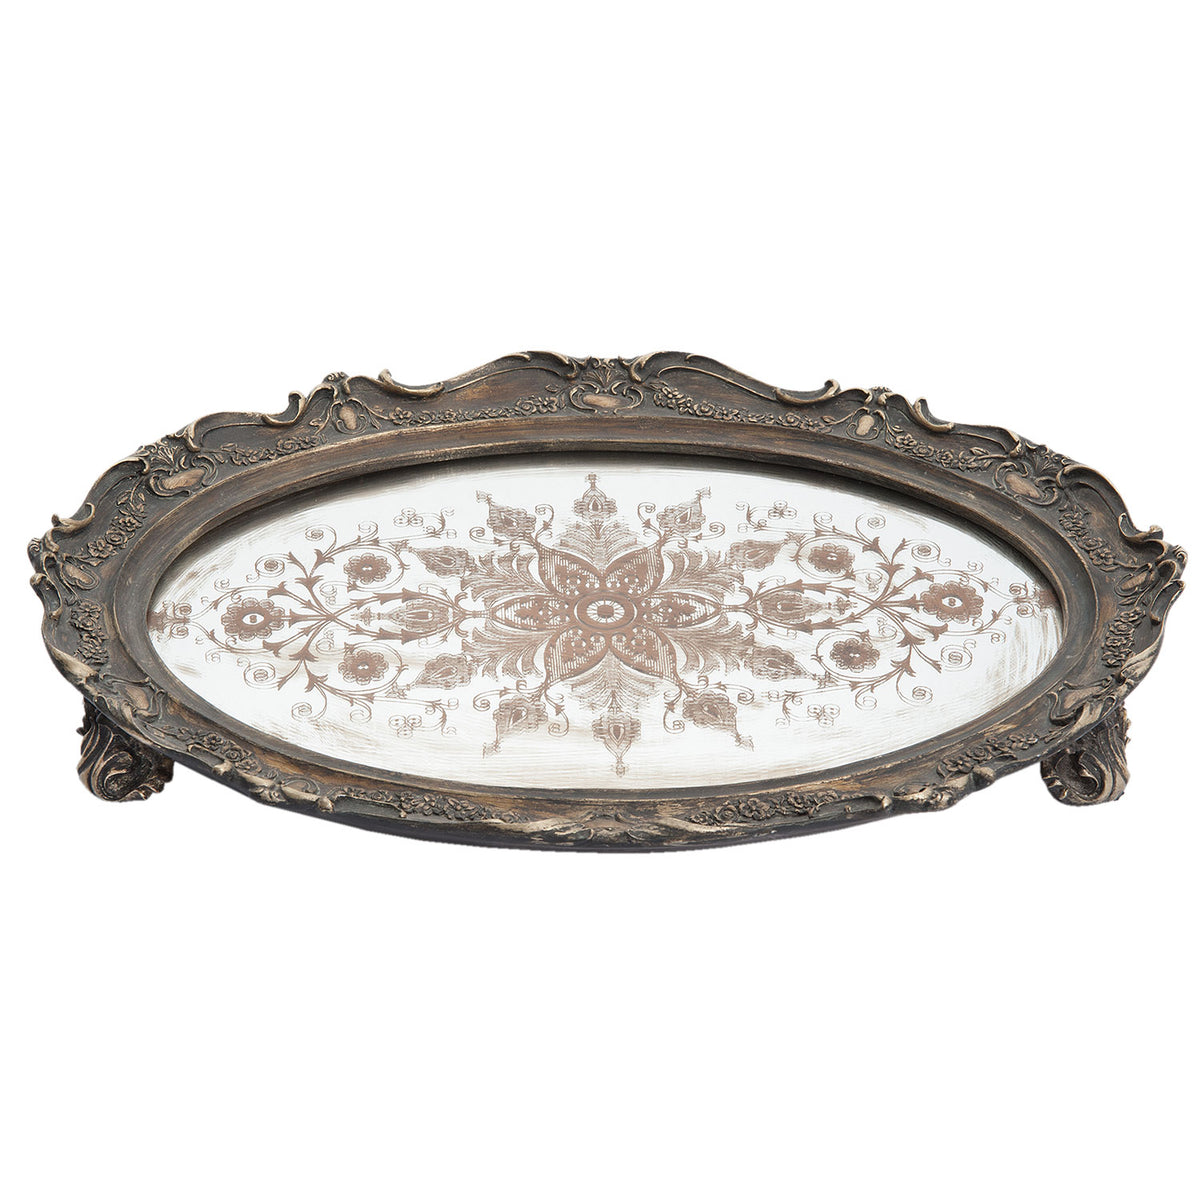 Oval mirror tray in old style